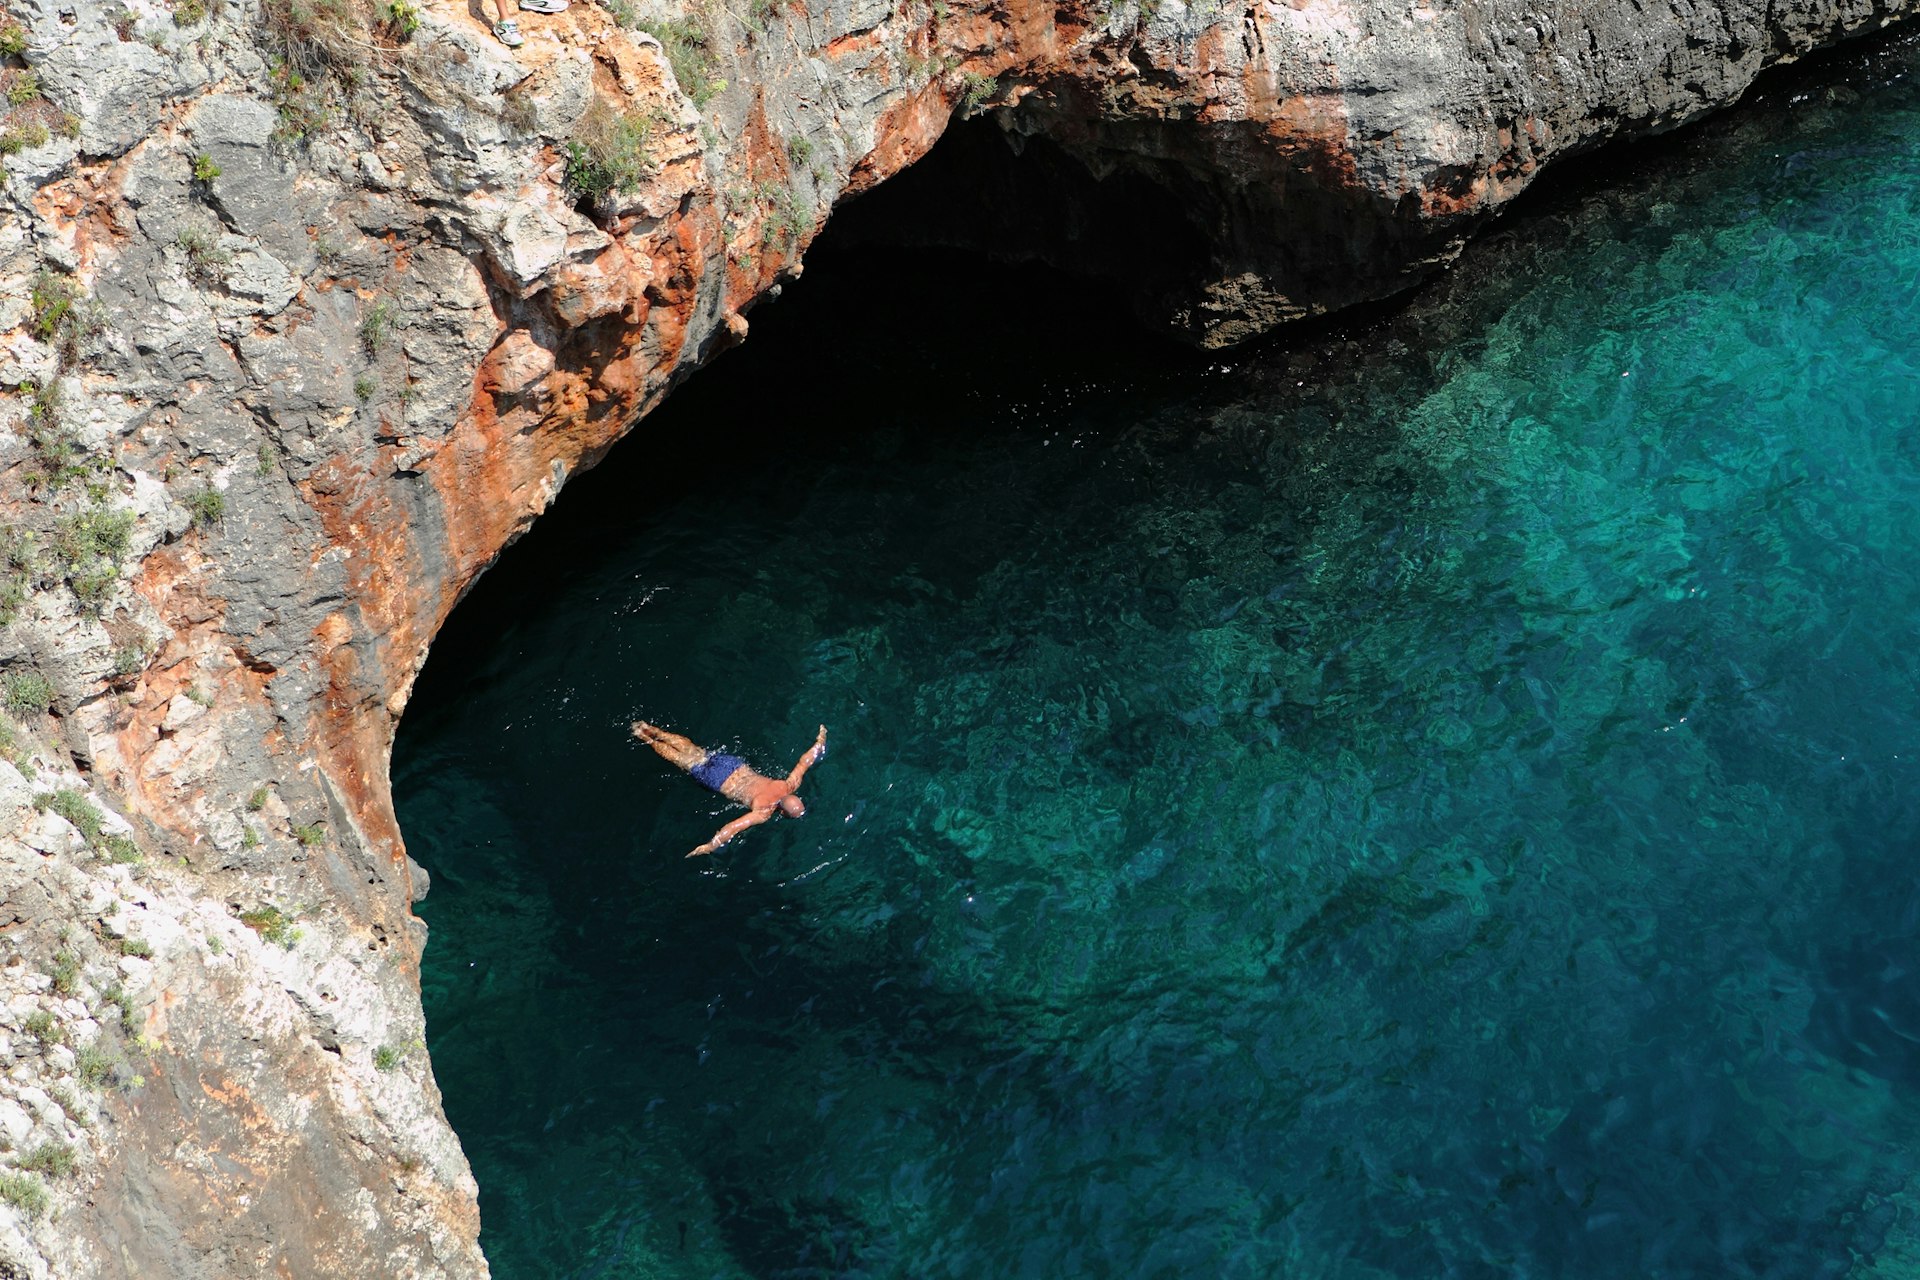 A person floats in a bay surrounded by rock